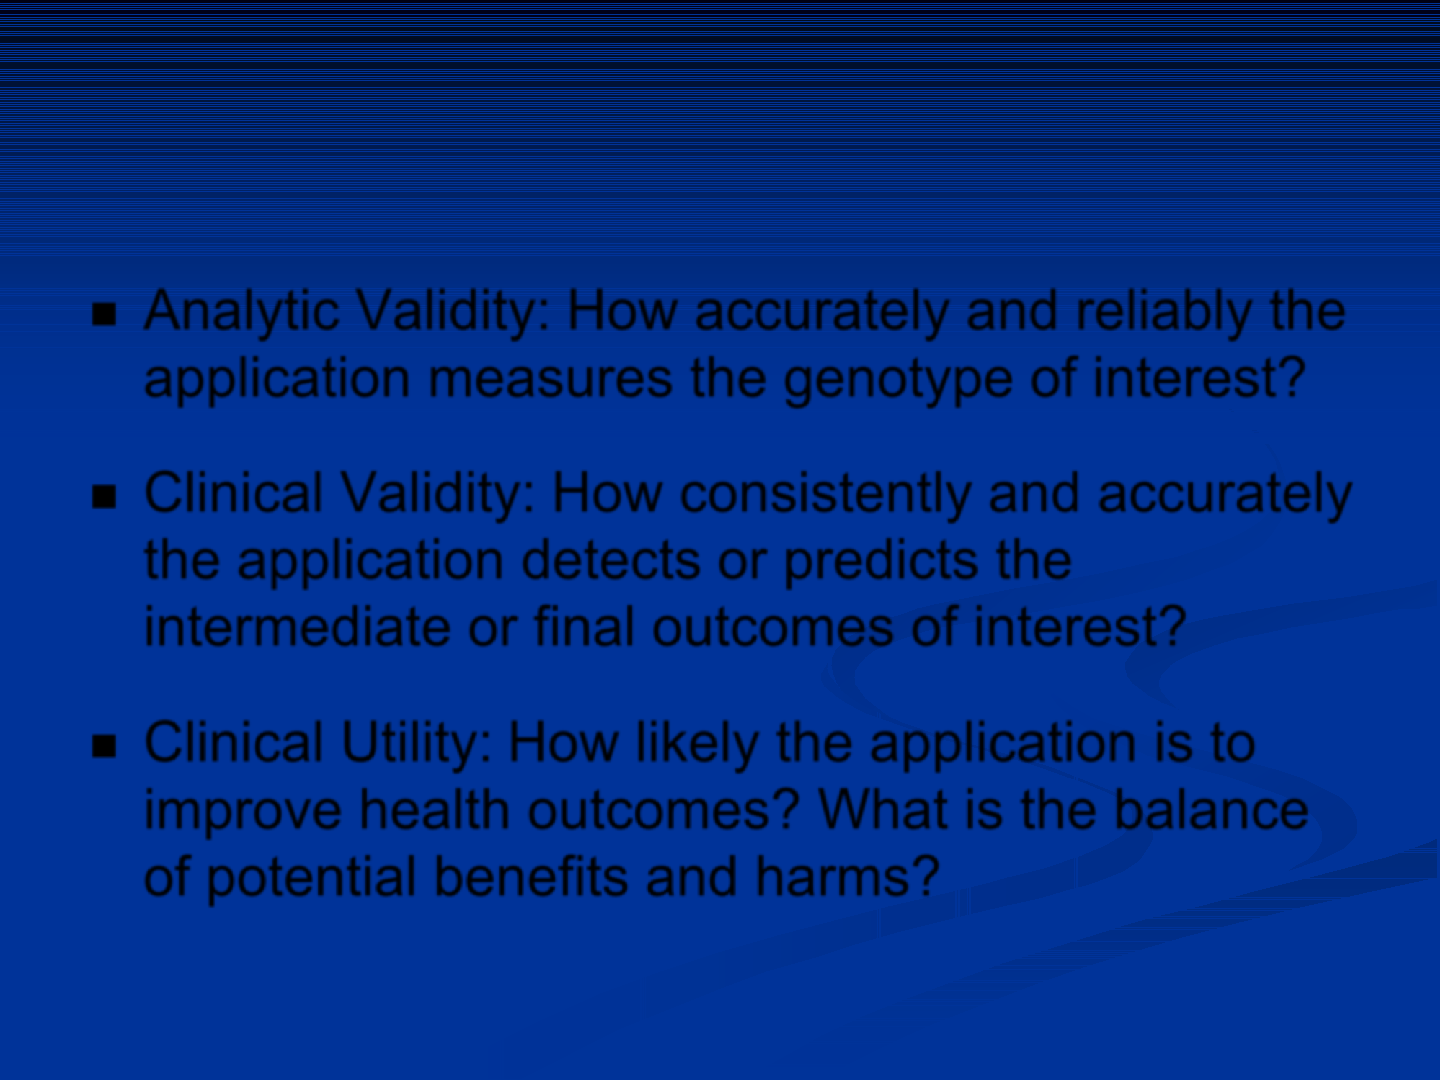 Need for More Evidence for Genomic Medicine Analytic Validity: How accurately and reliably the application measures the genotype of interest?